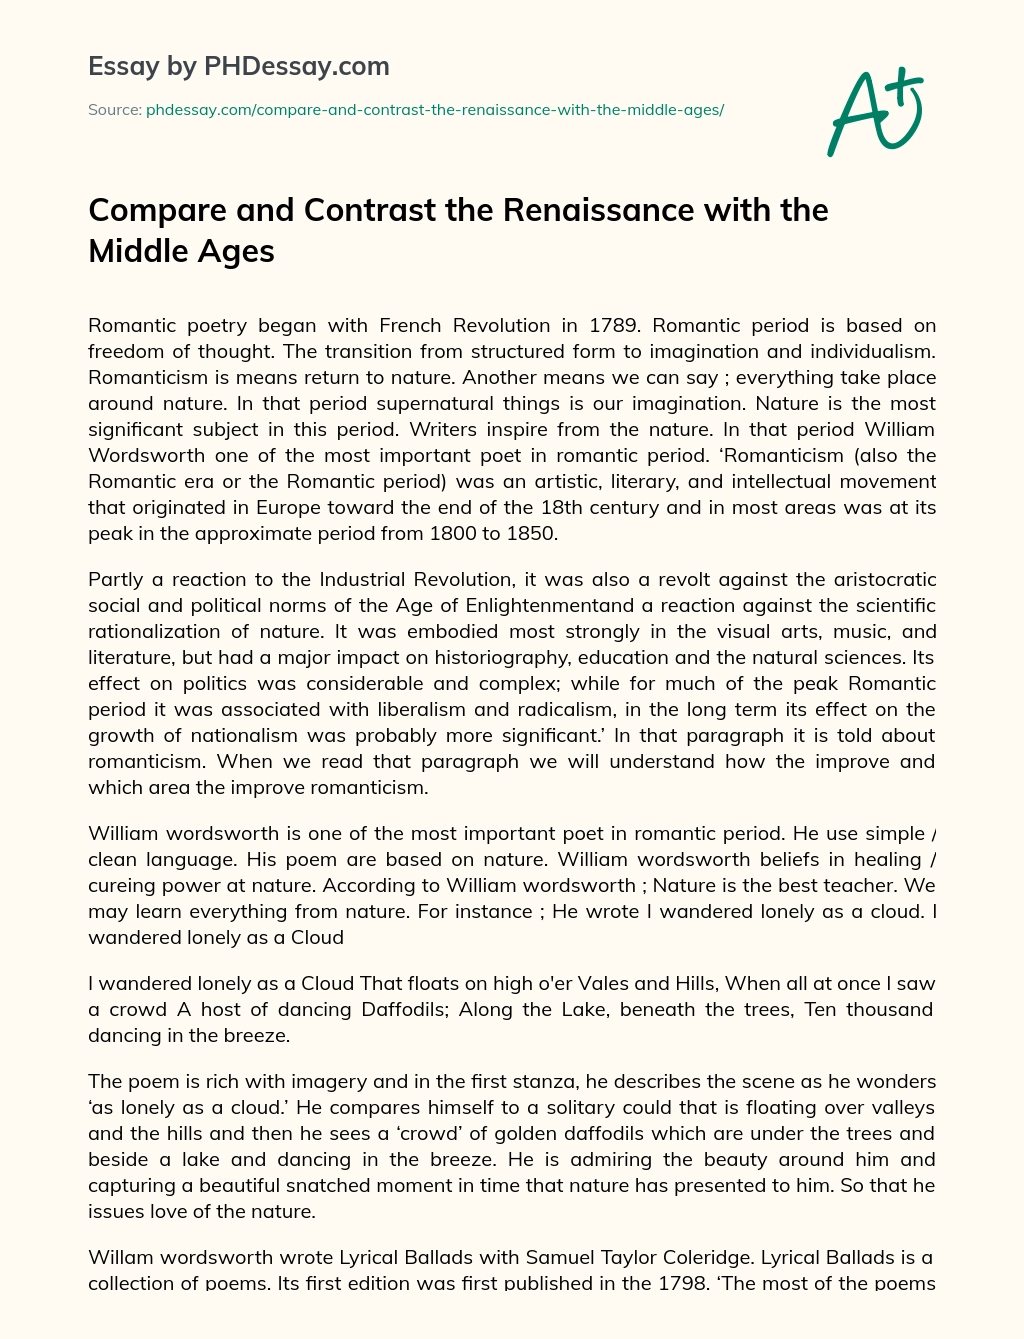 Compare and Contrast the Renaissance with the Middle Ages essay